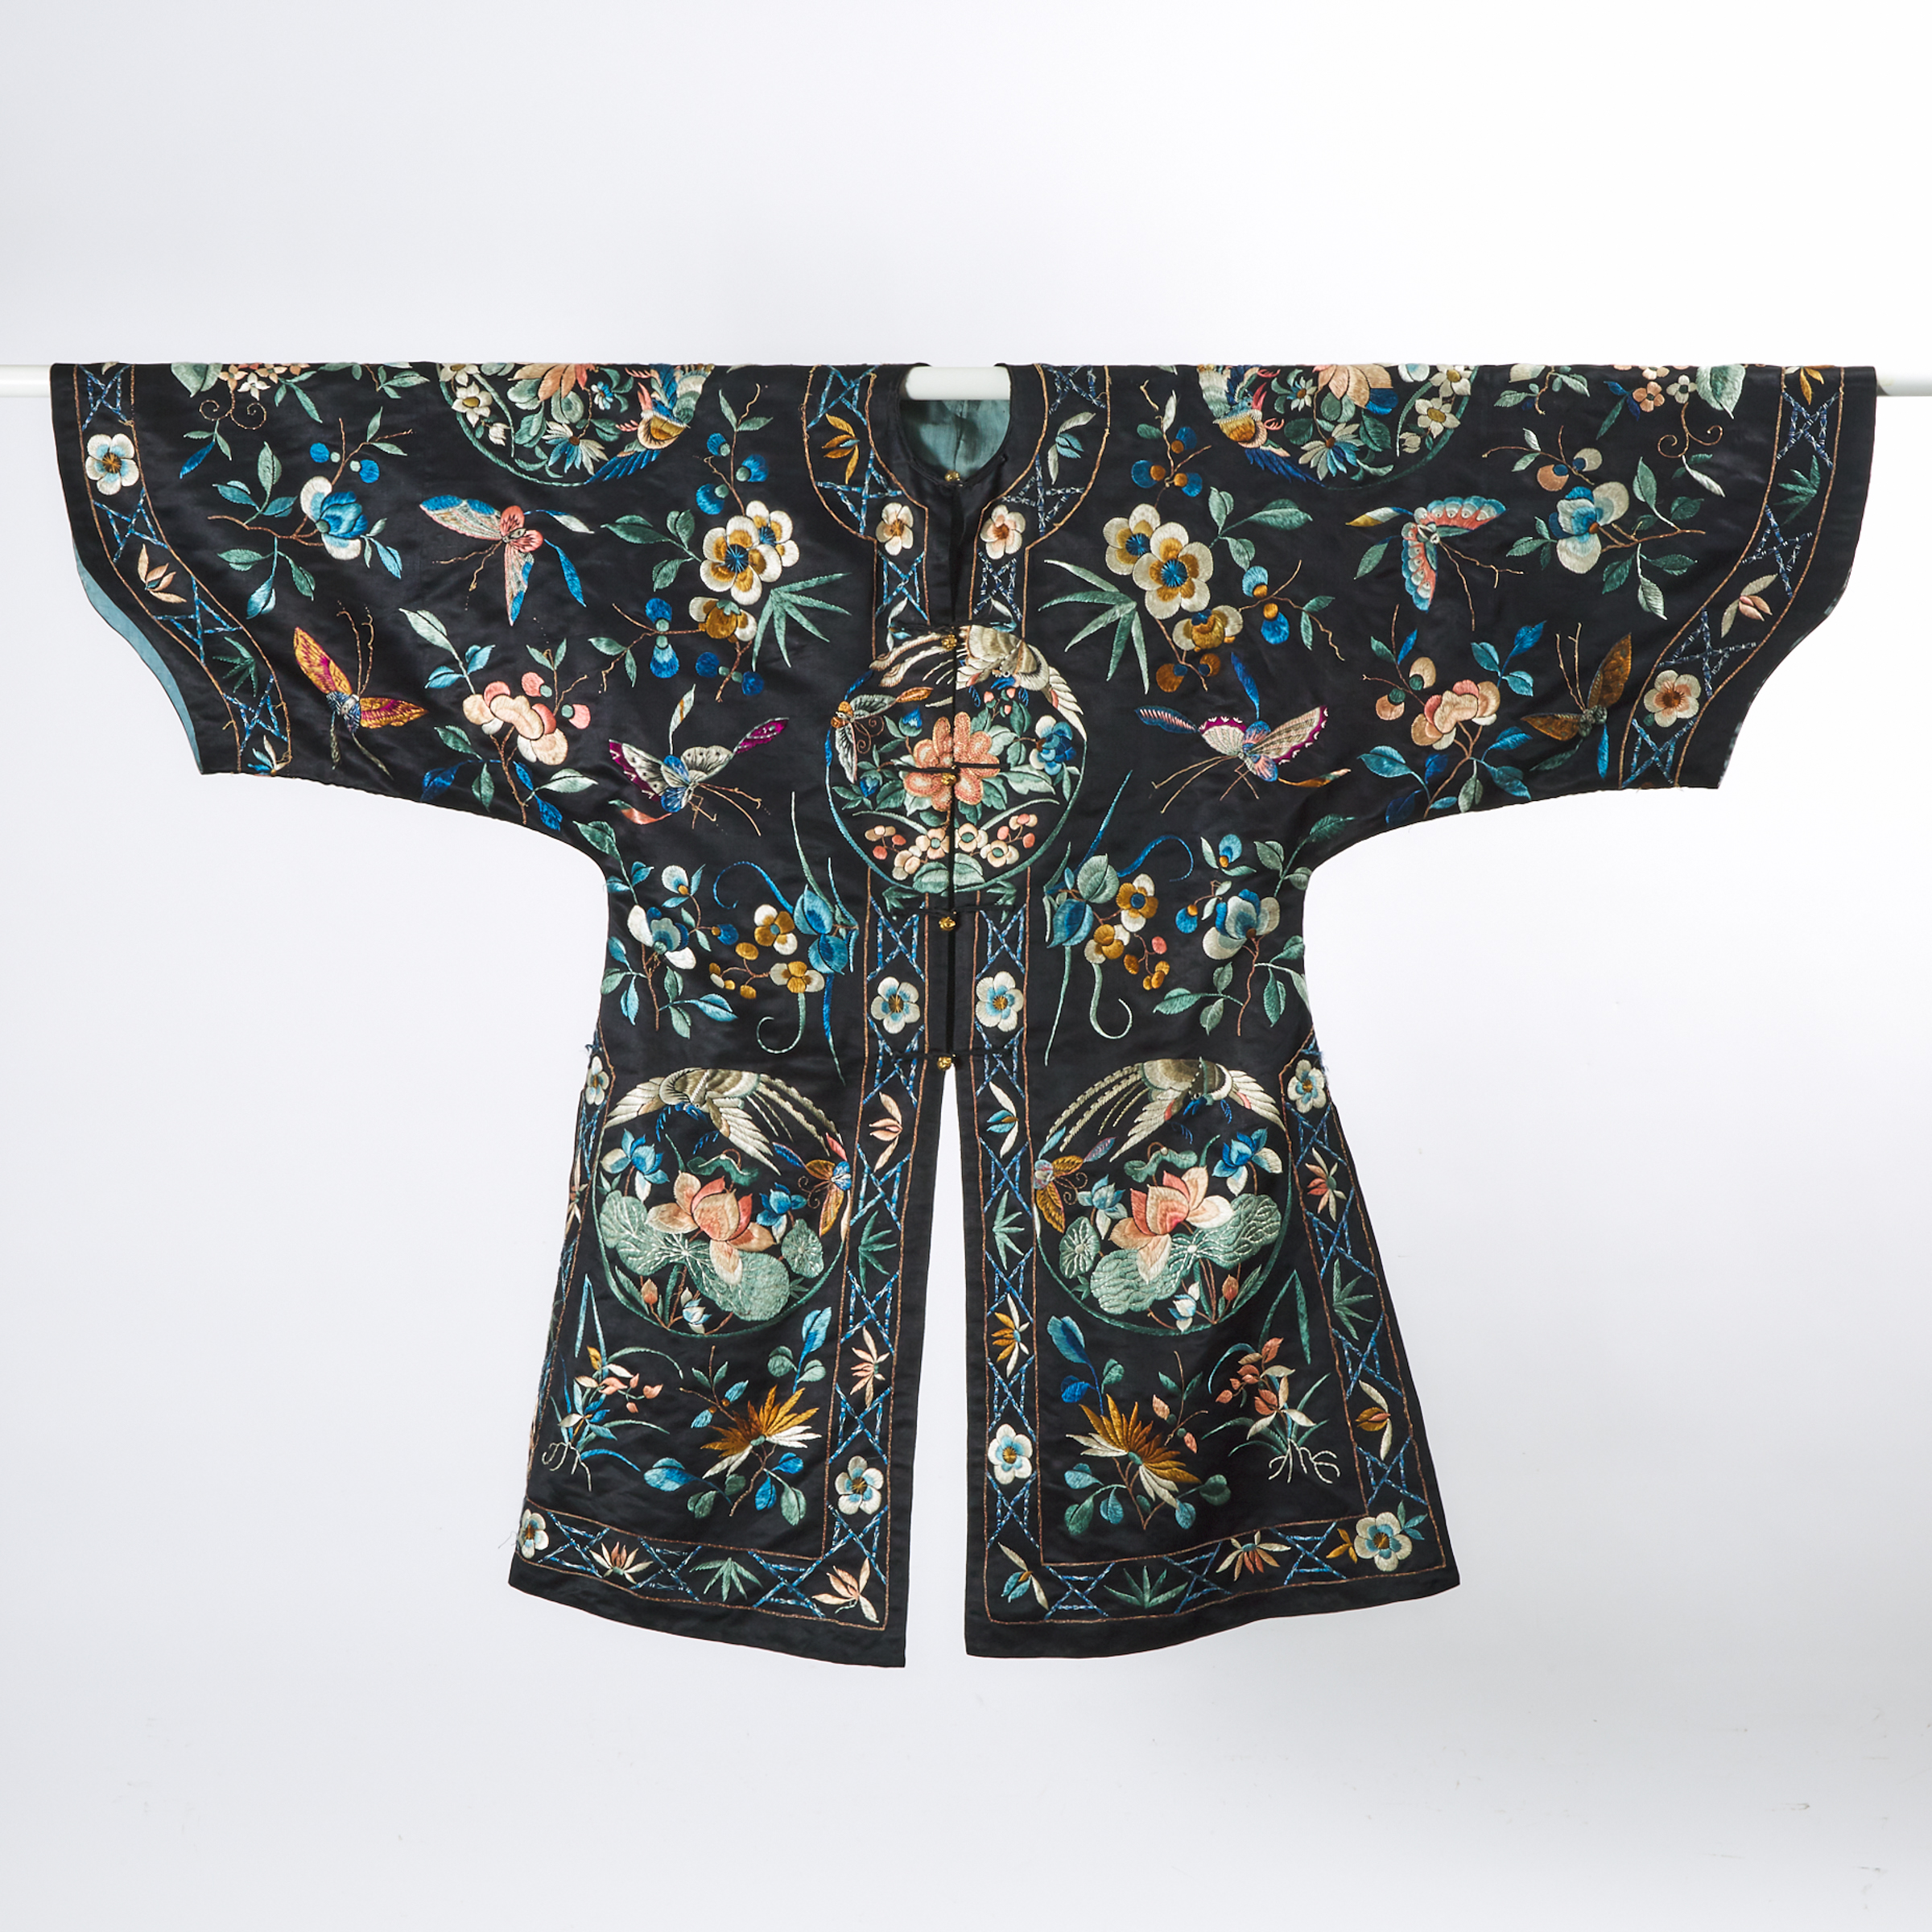 A Chinese Silk Embroidered  'Butterflies and Flowers' Overcoat, Late Qing Dynasty, 19th Century